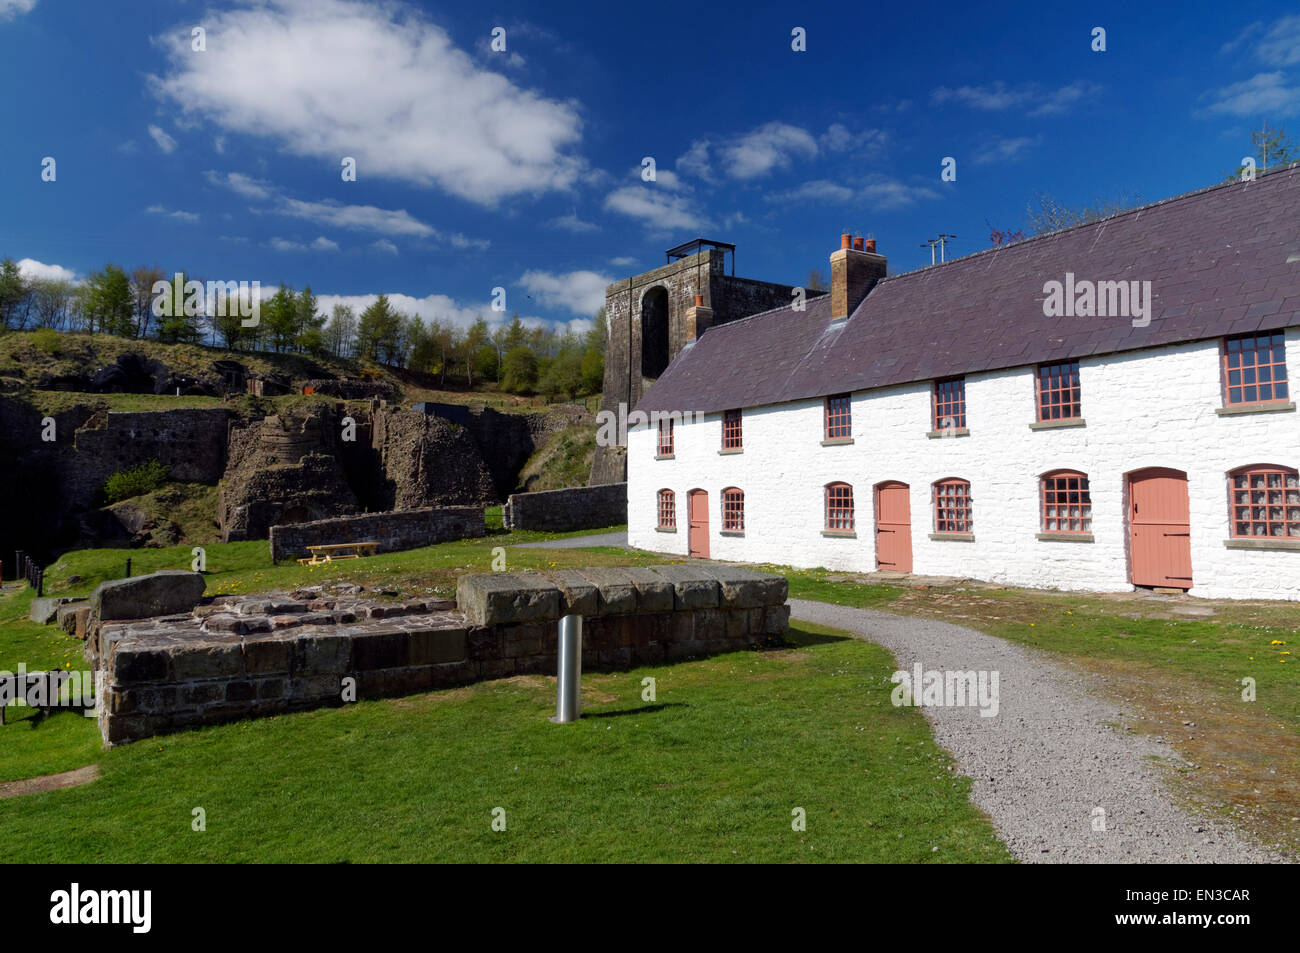 Workers Cottages, Blaenavon Ironworks part of the UNESCO World  Heritage Site, Blaenavon, South Wales Valleys, Wales, UK. Stock Photo